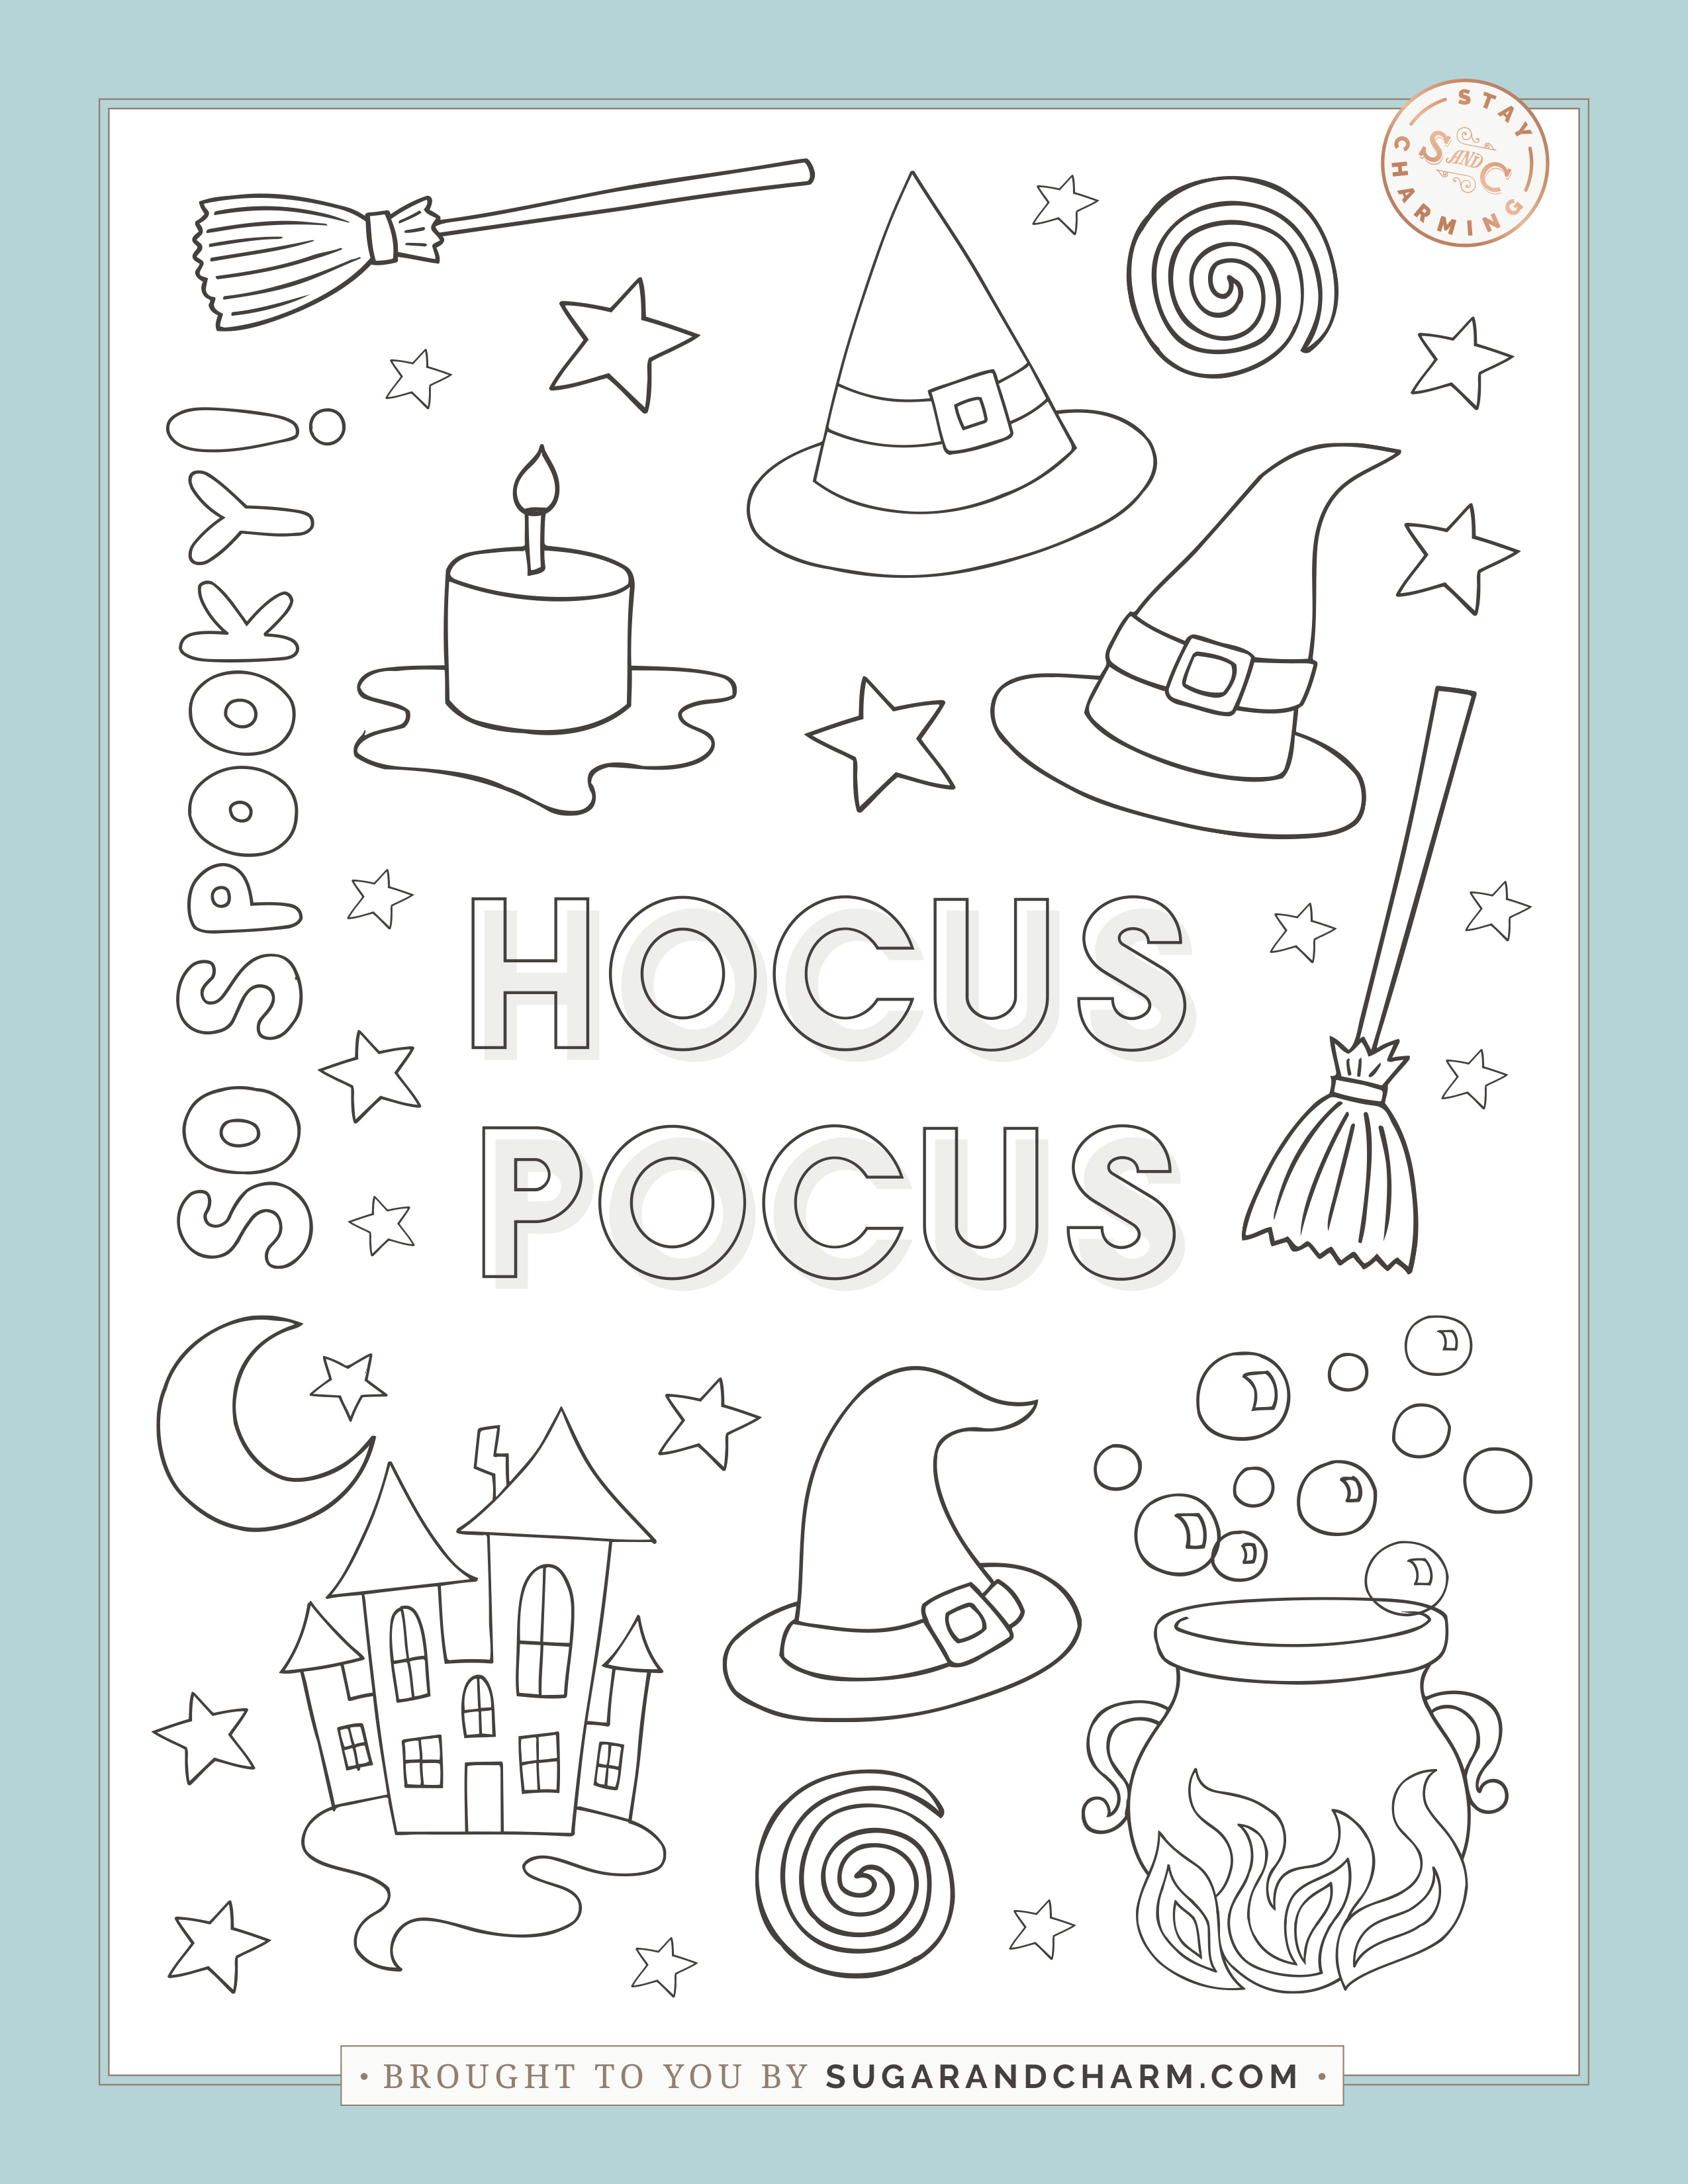 Easy cute halloween coloring pages for anyone